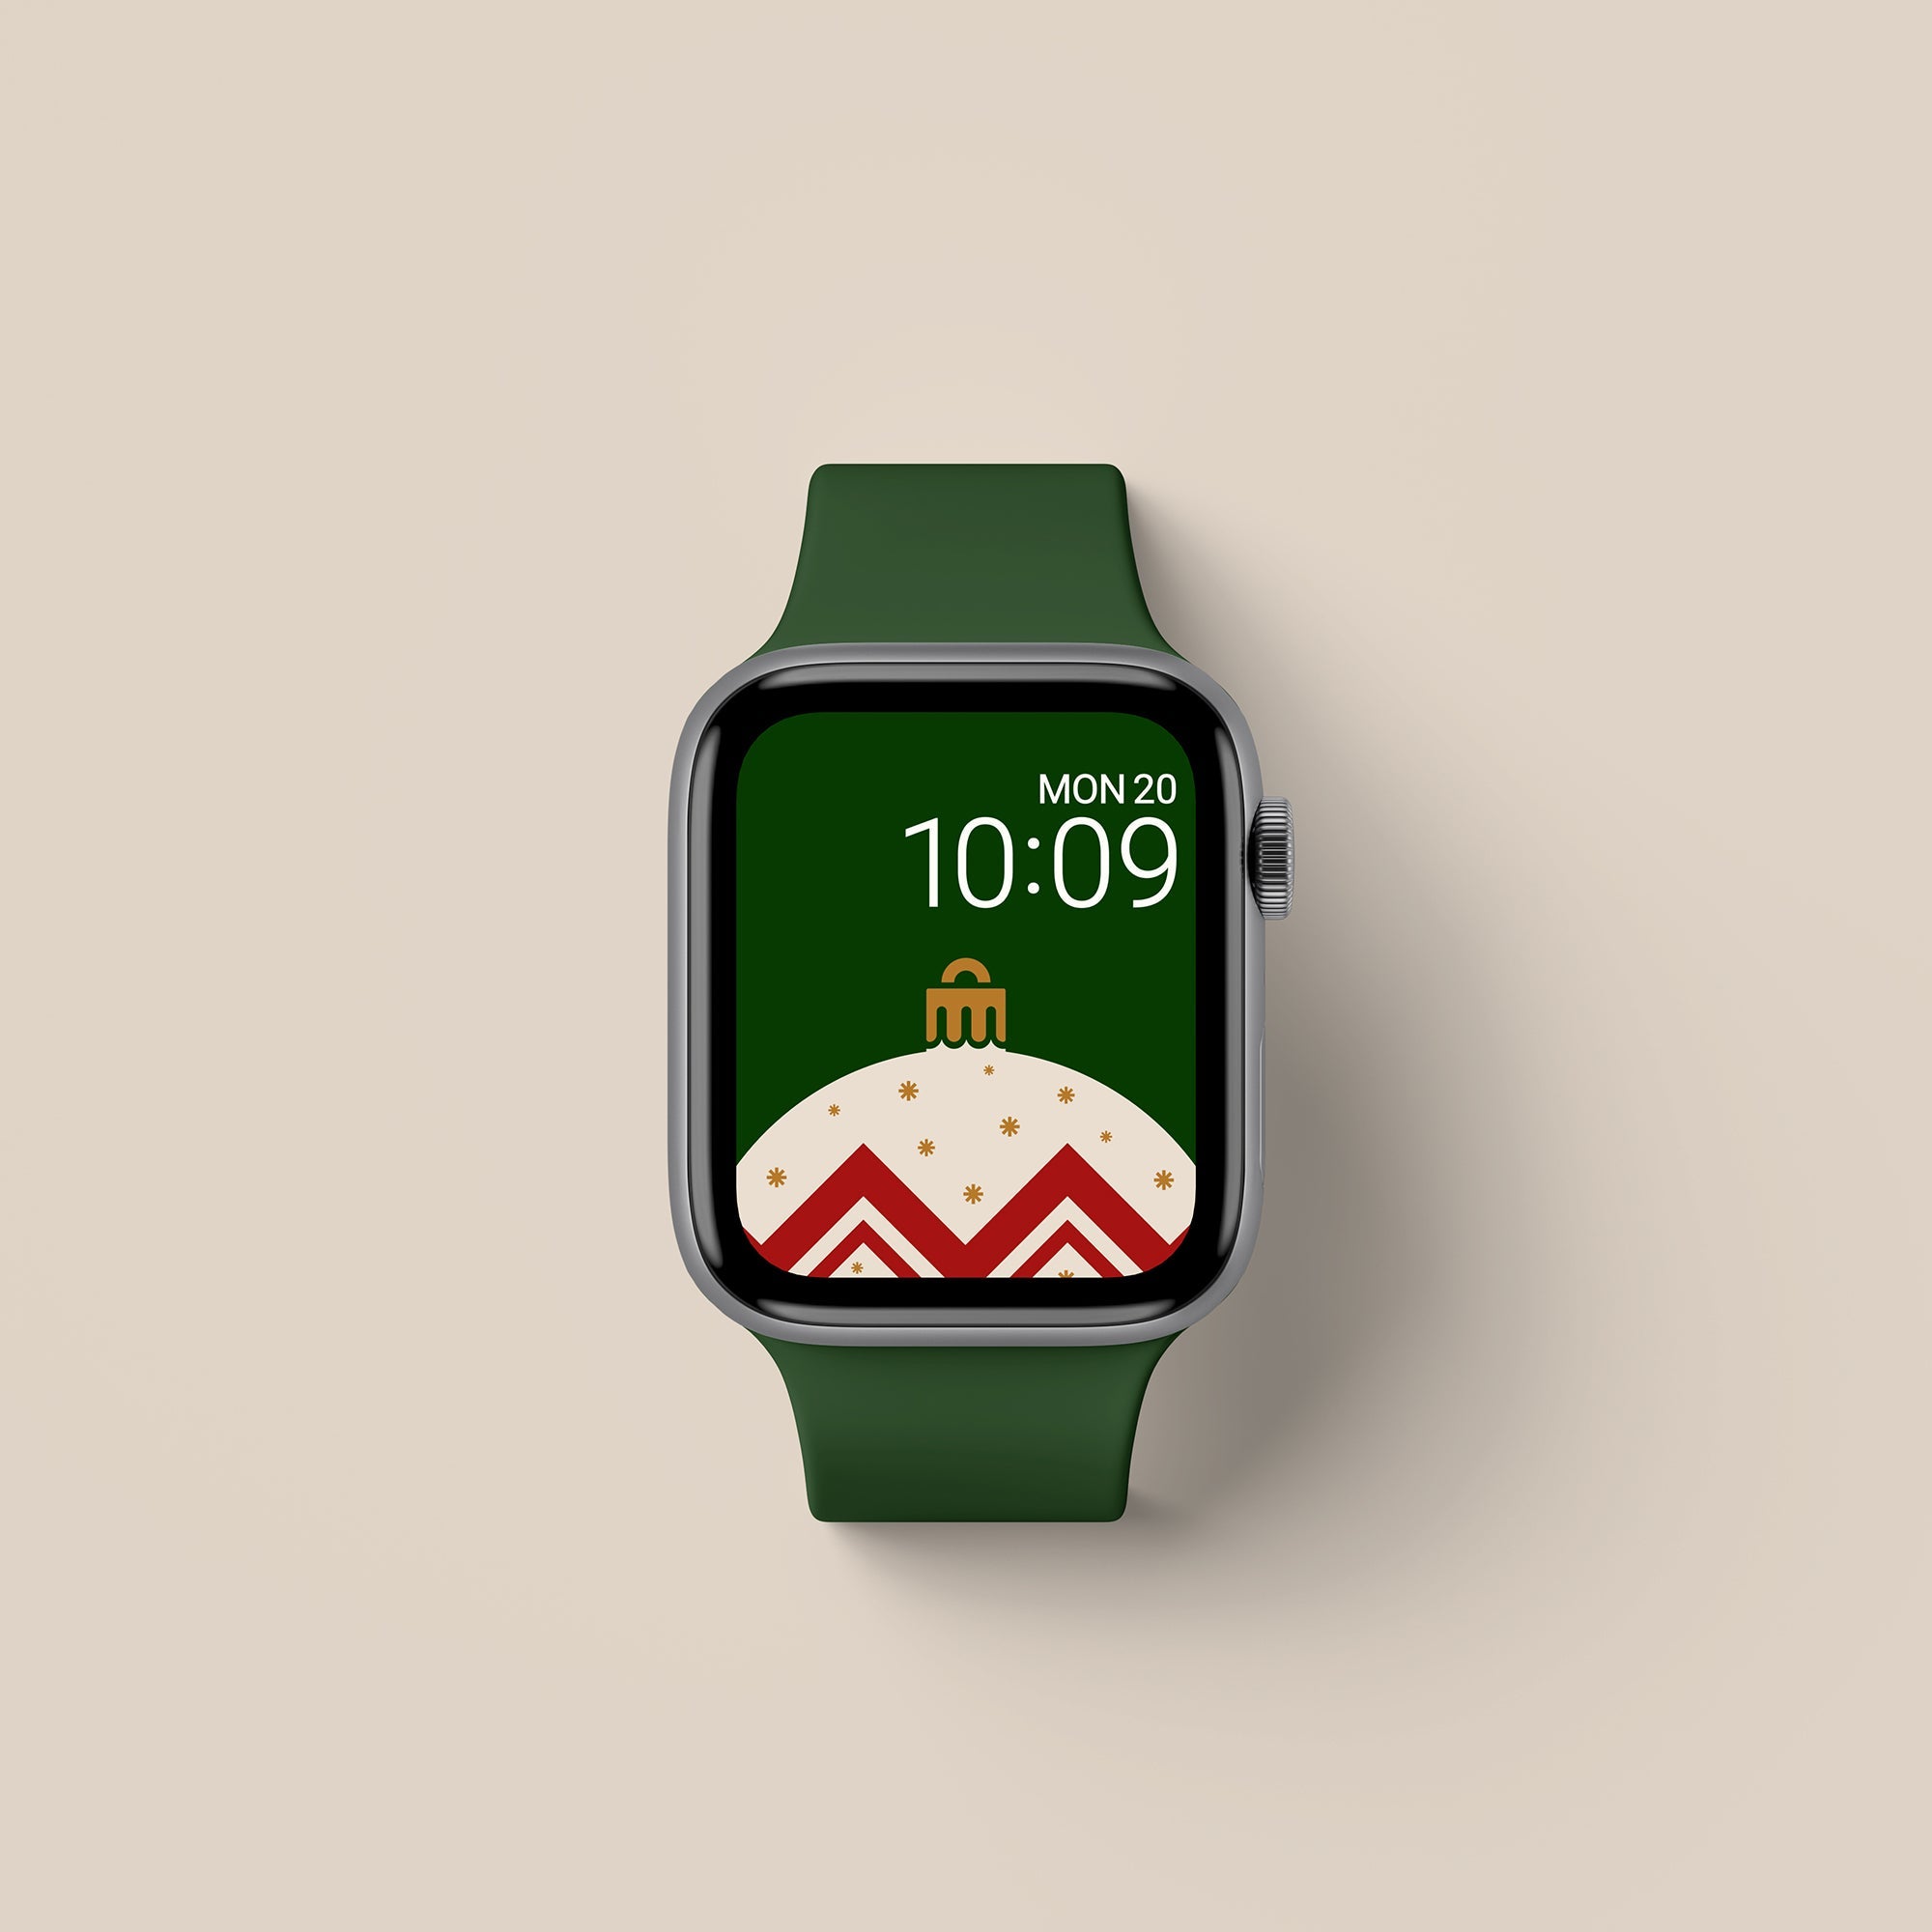 Festive Apple Watch Wallpapers (4 Pack) - Buckle and Band - FEST-CL